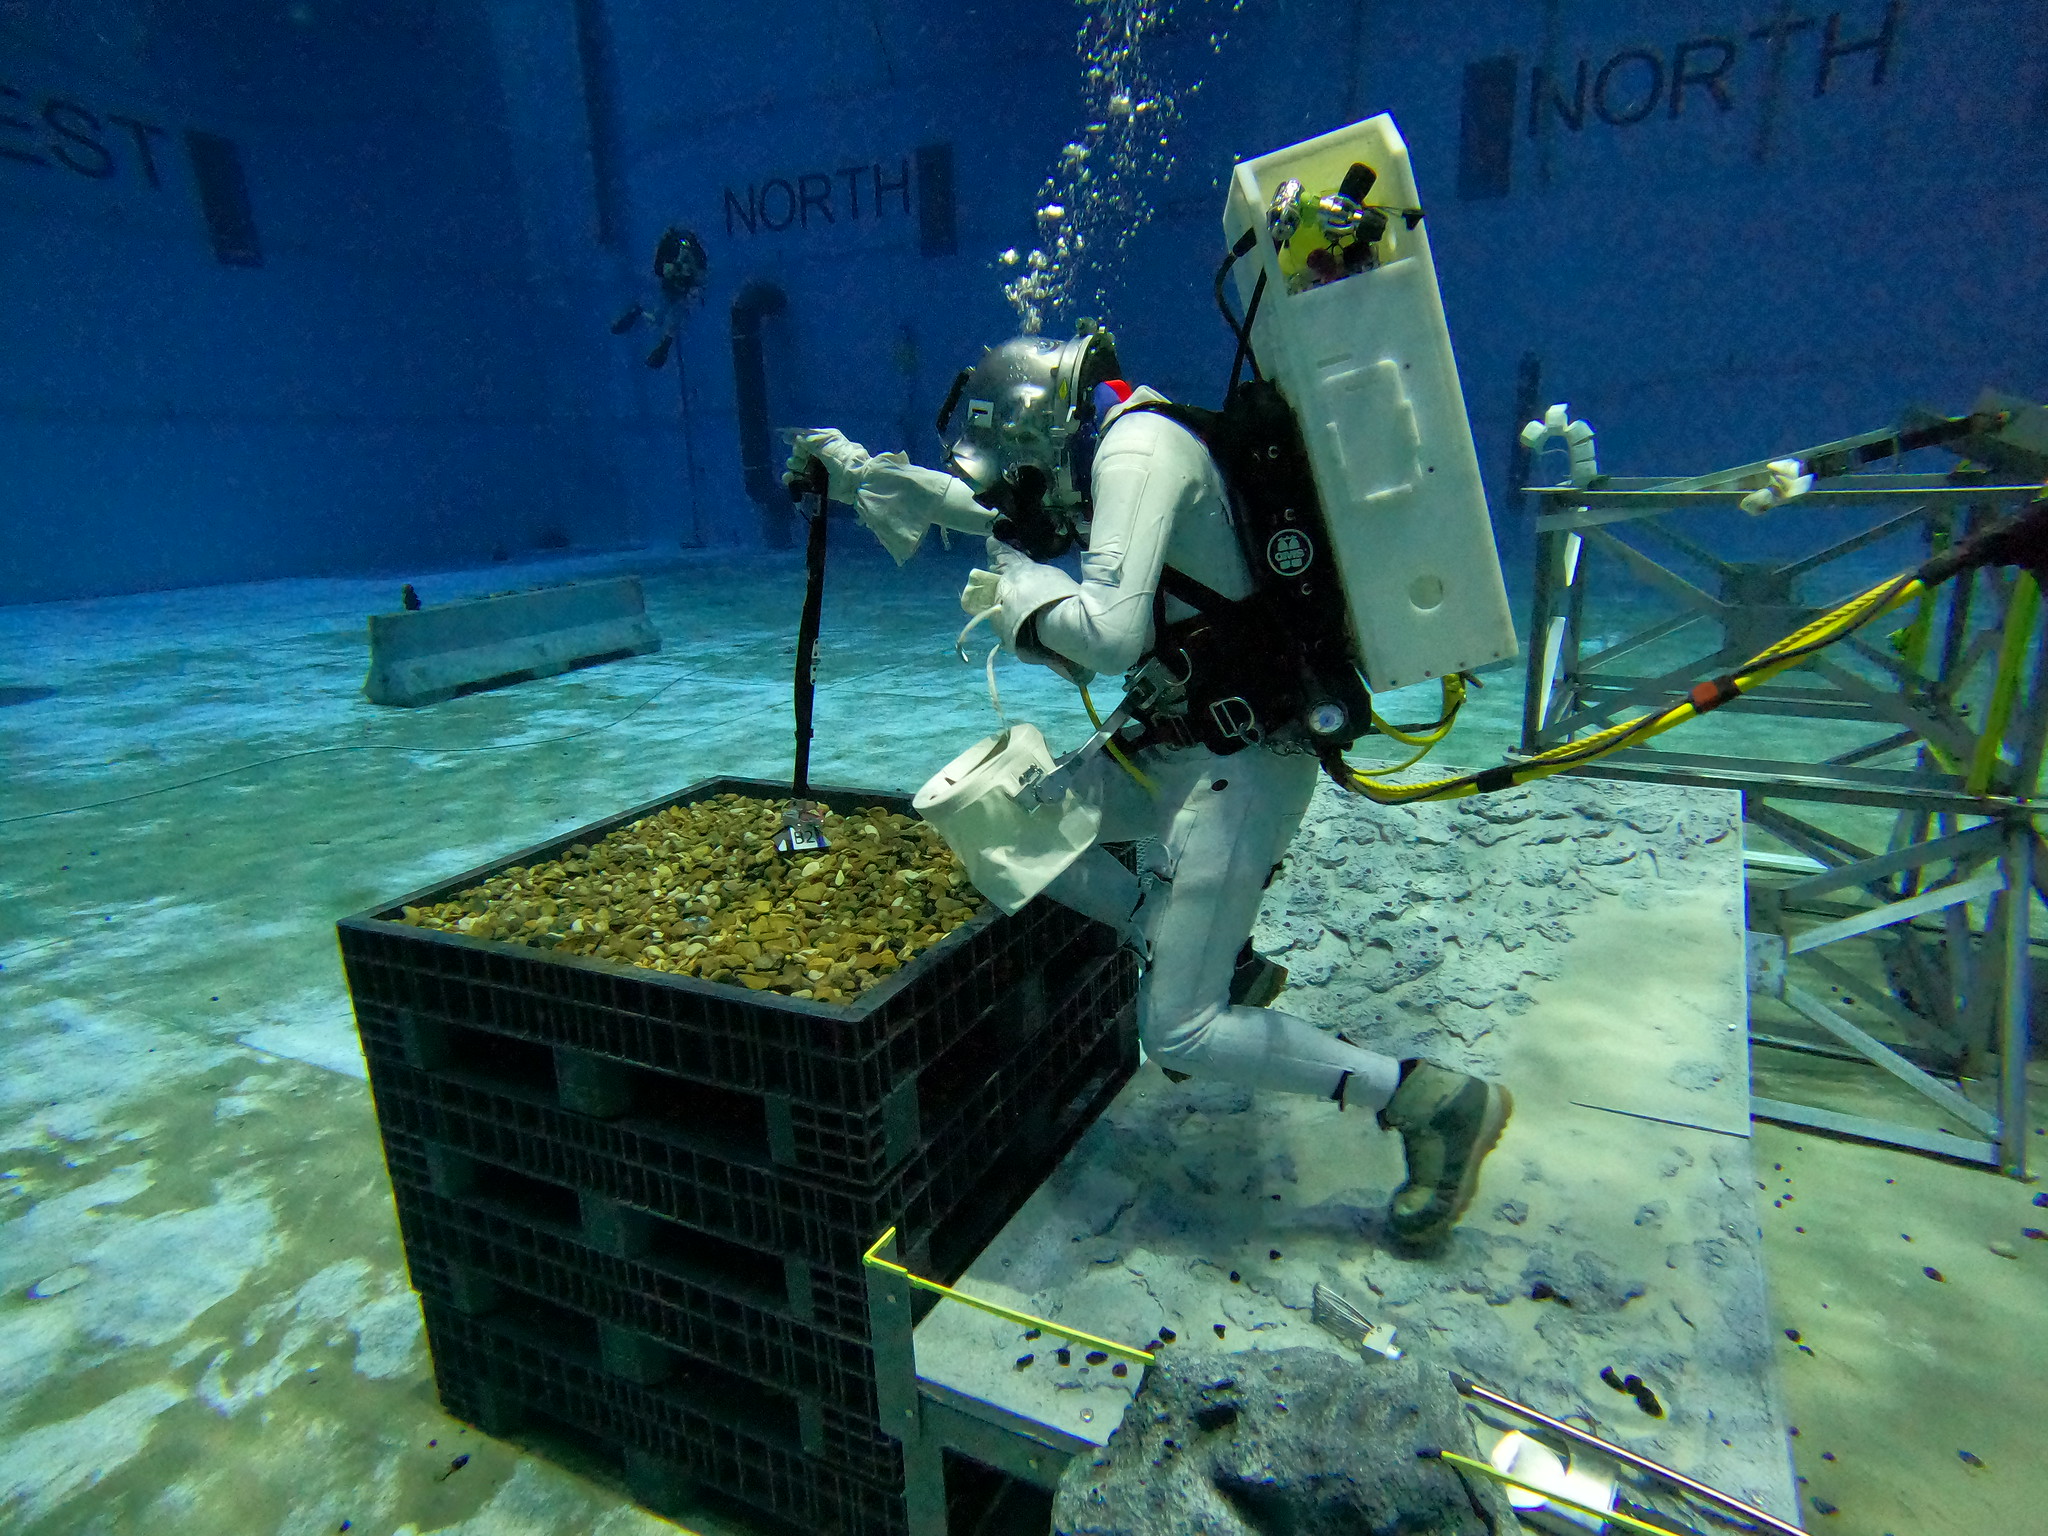 Diver uses tool to pick up rocks under water